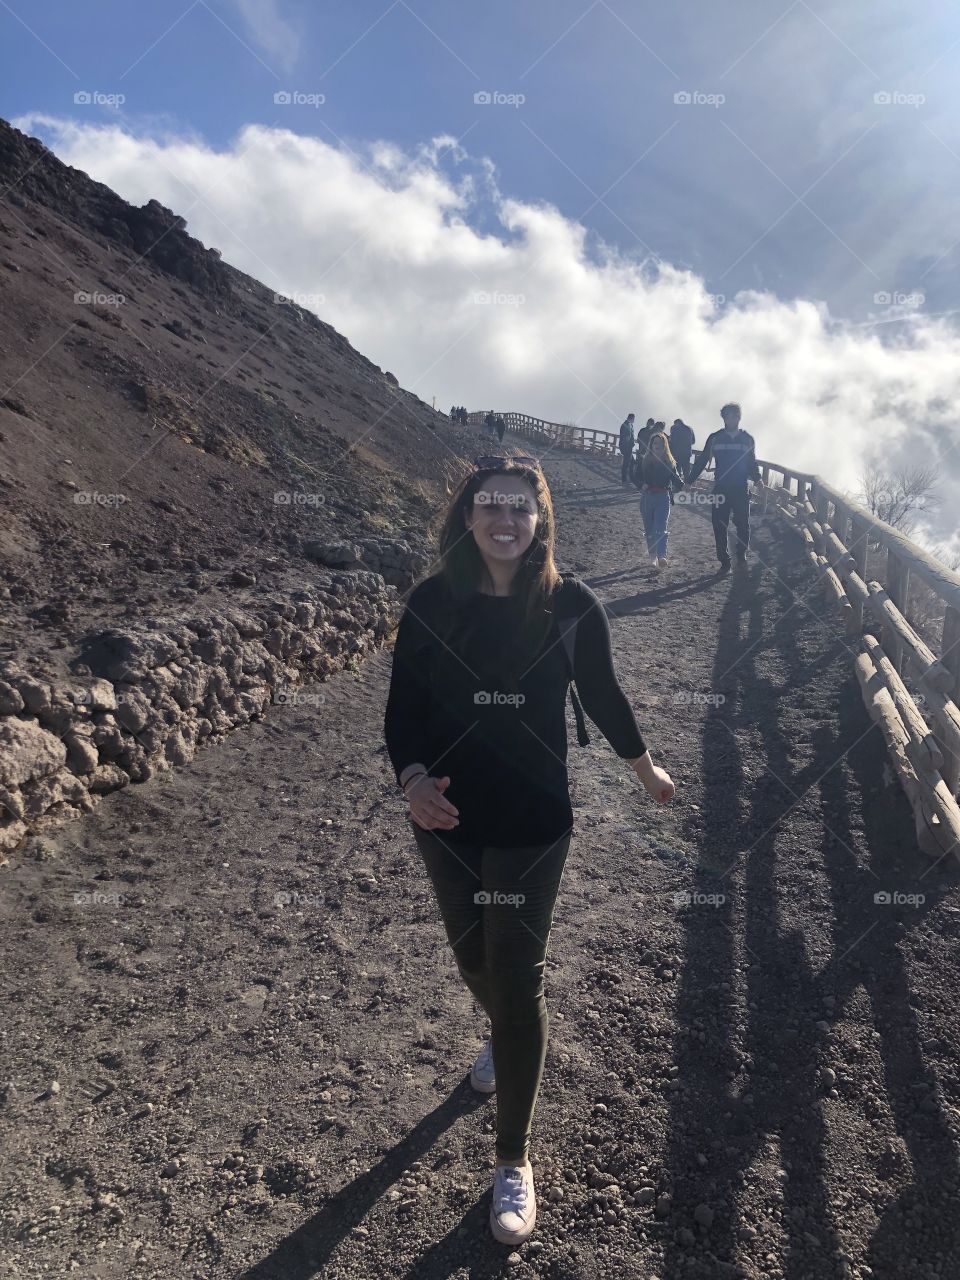 Walking down Mount Vesuvius on a sunny day